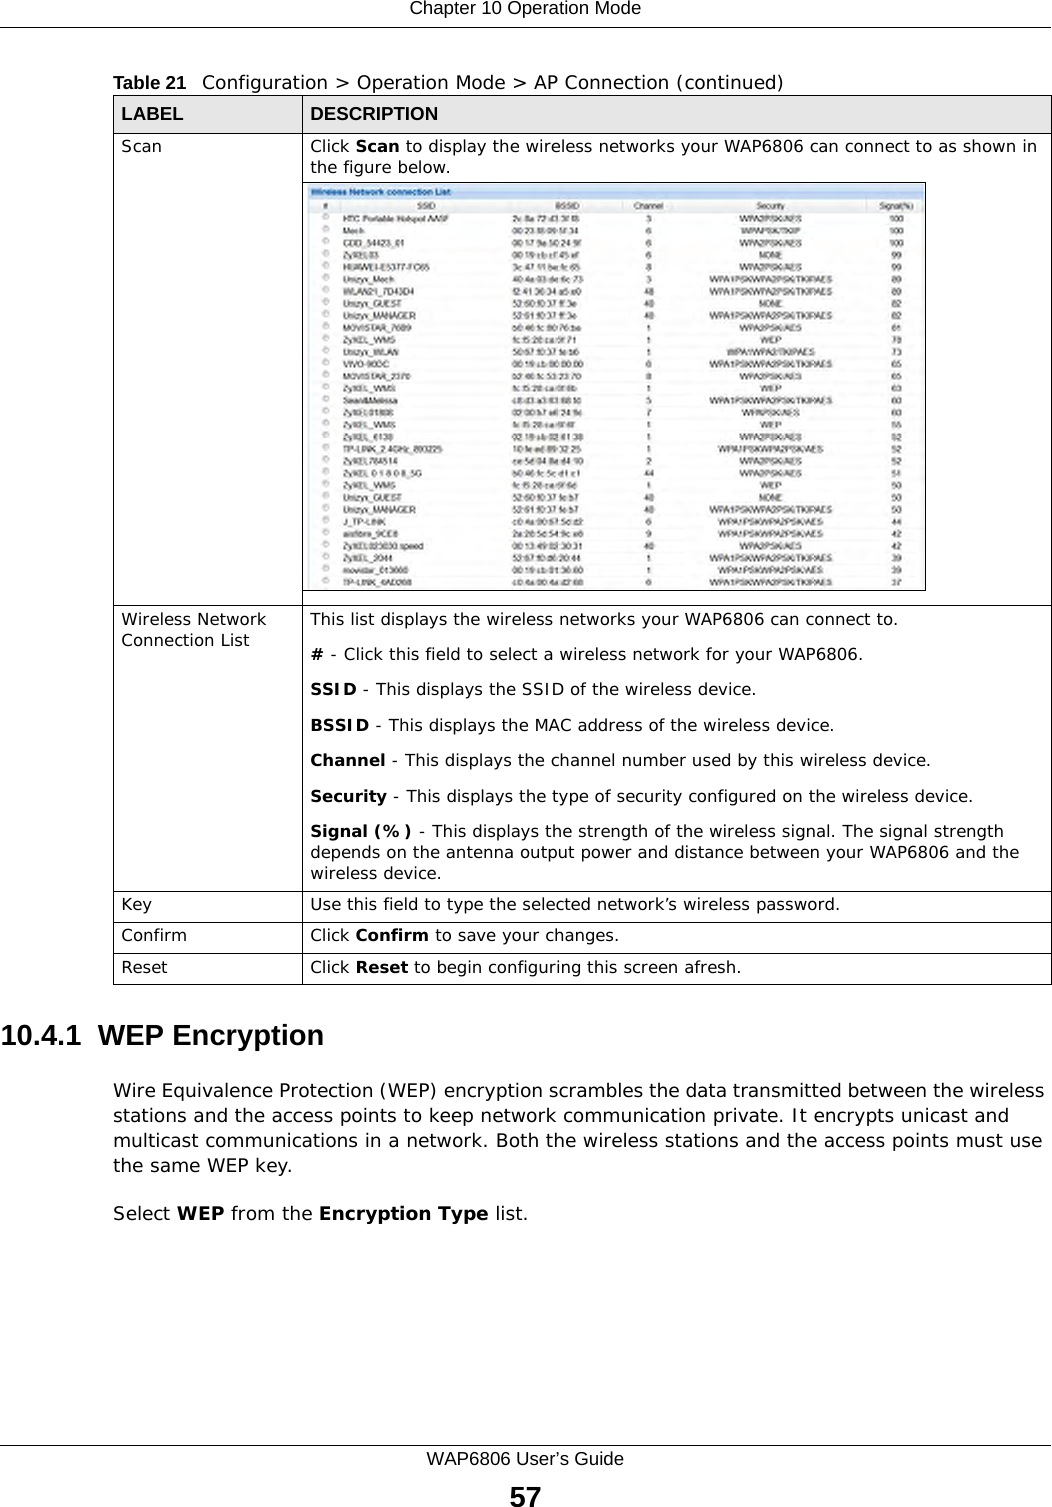 Chapter 10 Operation ModeWAP6806 User’s Guide5710.4.1  WEP EncryptionWire Equivalence Protection (WEP) encryption scrambles the data transmitted between the wireless stations and the access points to keep network communication private. It encrypts unicast and multicast communications in a network. Both the wireless stations and the access points must use the same WEP key.Select WEP from the Encryption Type list.Scan Click Scan to display the wireless networks your WAP6806 can connect to as shown in the figure below.Wireless Network Connection List This list displays the wireless networks your WAP6806 can connect to.# - Click this field to select a wireless network for your WAP6806.SSID - This displays the SSID of the wireless device.BSSID - This displays the MAC address of the wireless device.Channel - This displays the channel number used by this wireless device.Security - This displays the type of security configured on the wireless device.Signal (%) - This displays the strength of the wireless signal. The signal strength depends on the antenna output power and distance between your WAP6806 and the wireless device.Key Use this field to type the selected network’s wireless password.Confirm Click Confirm to save your changes.Reset Click Reset to begin configuring this screen afresh.Table 21   Configuration &gt; Operation Mode &gt; AP Connection (continued)LABEL DESCRIPTION